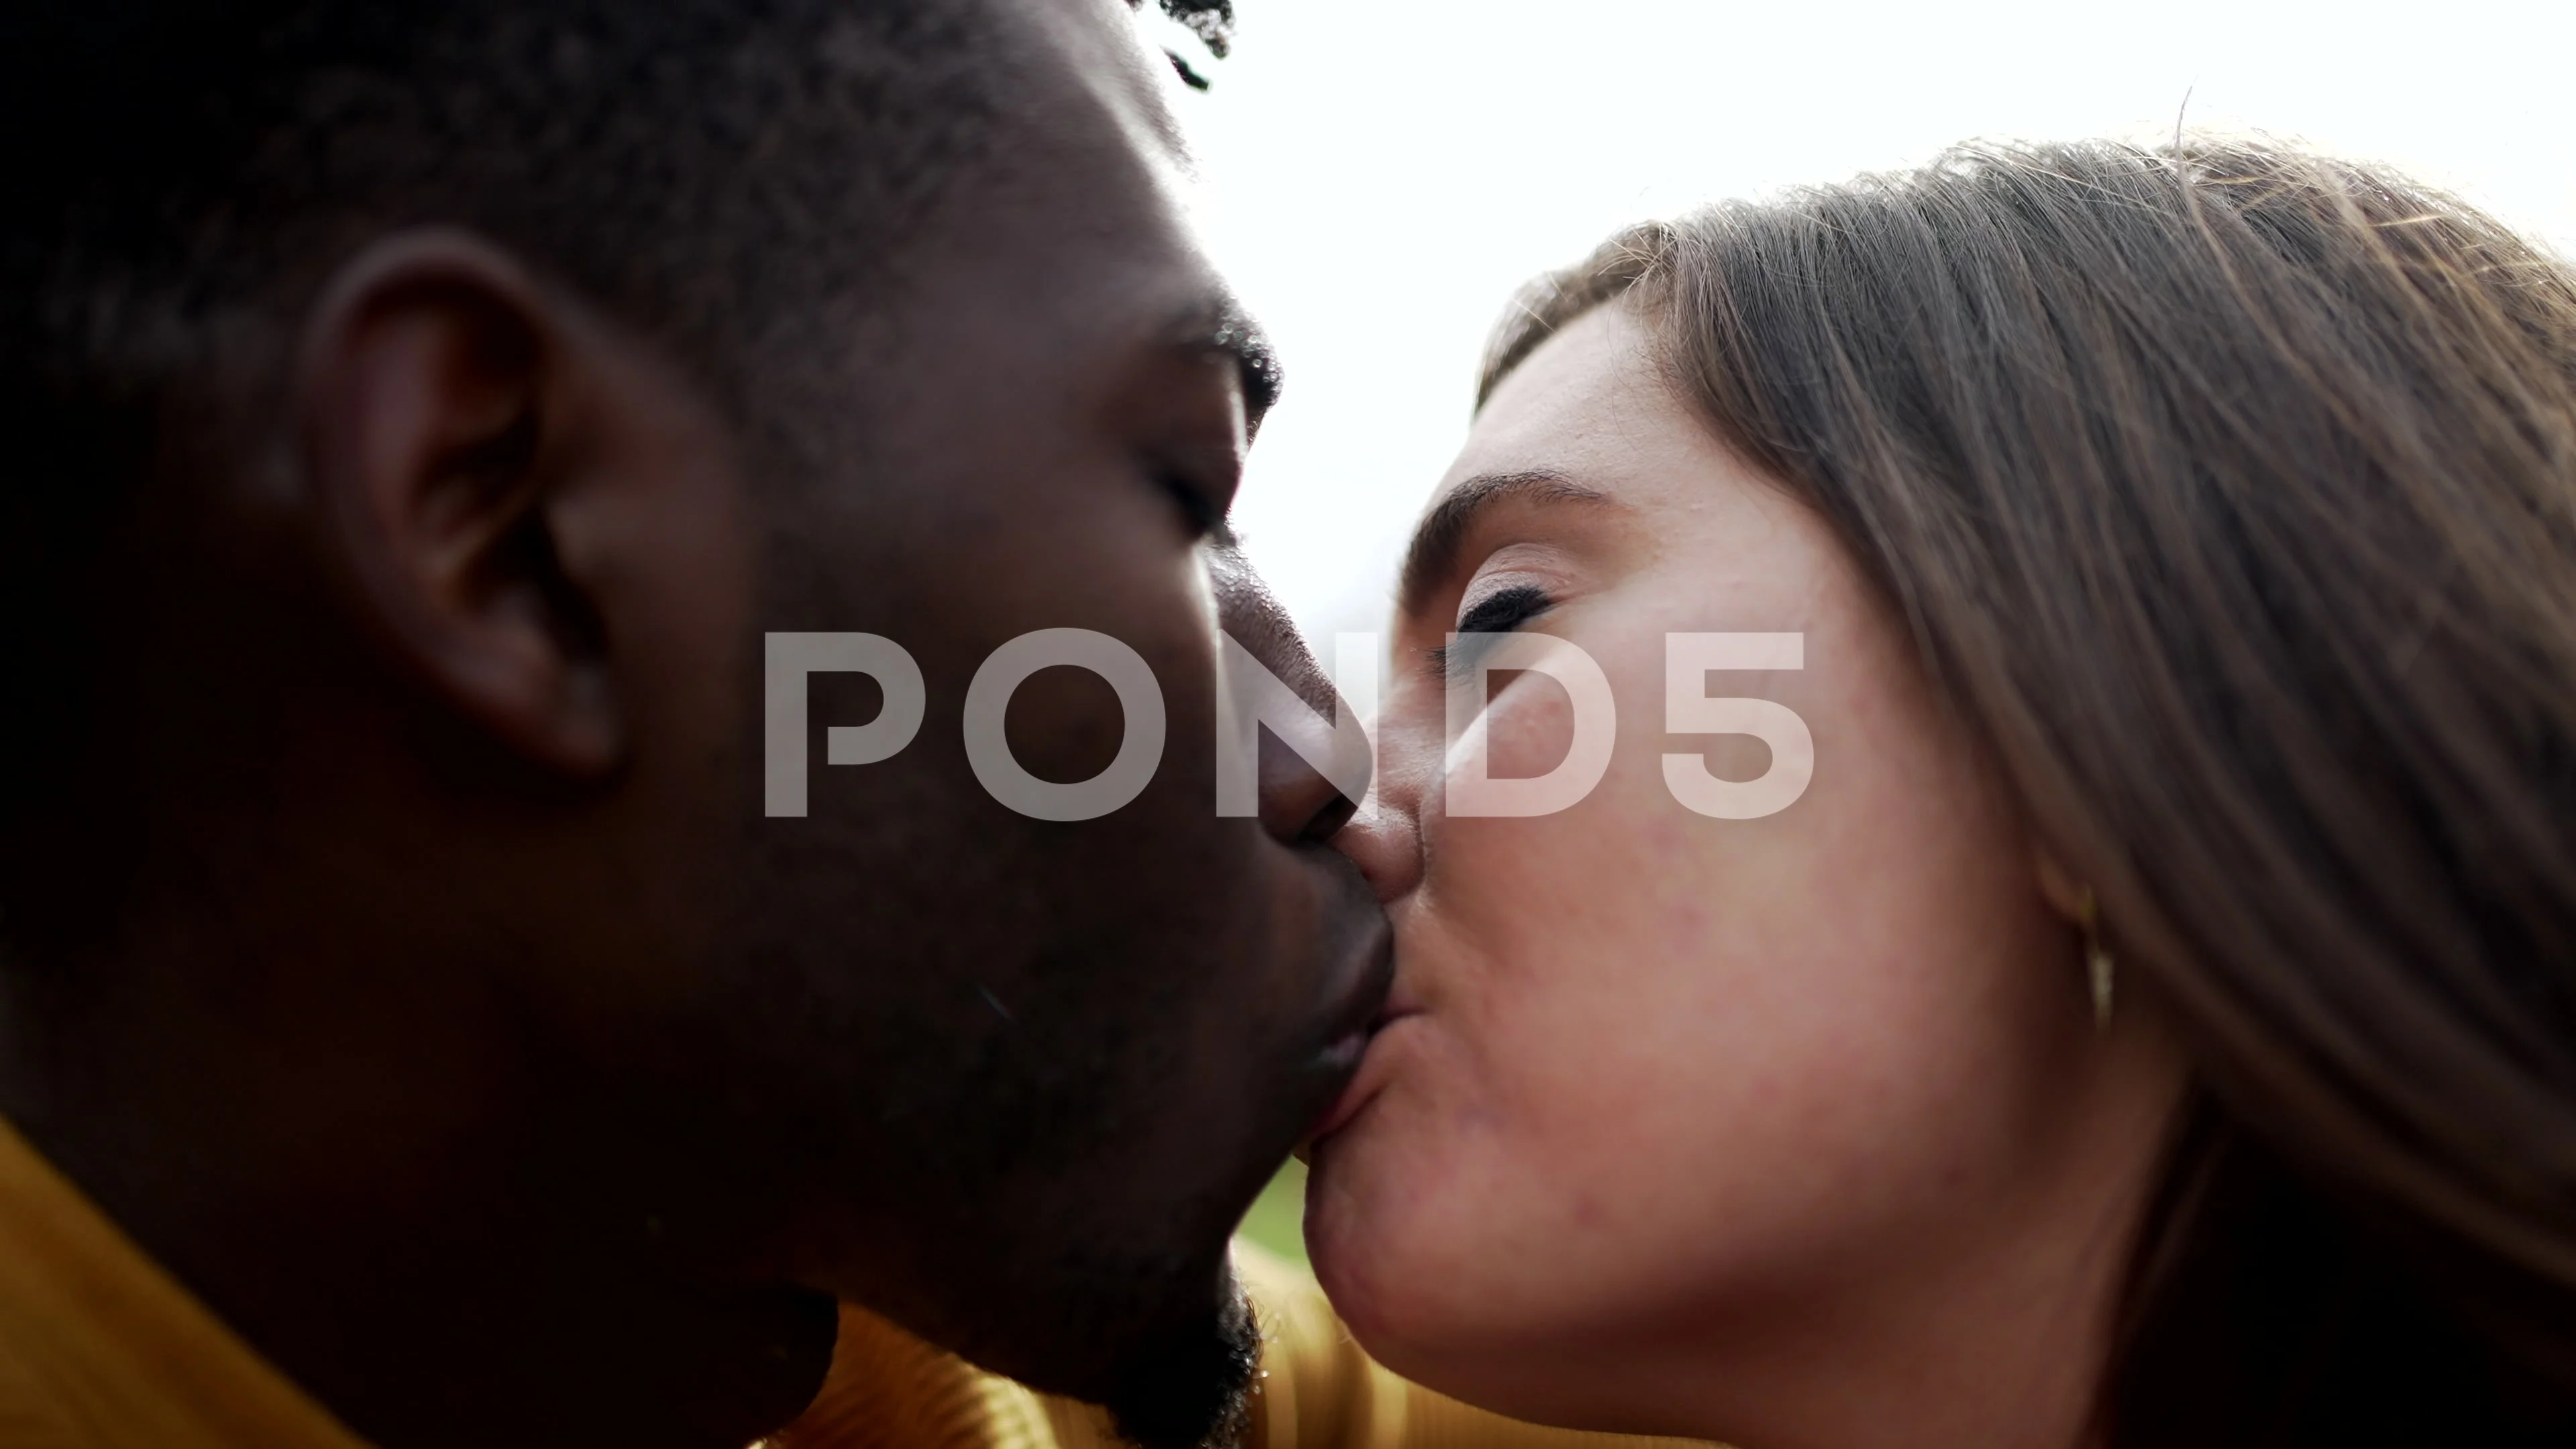 Interracial makeout